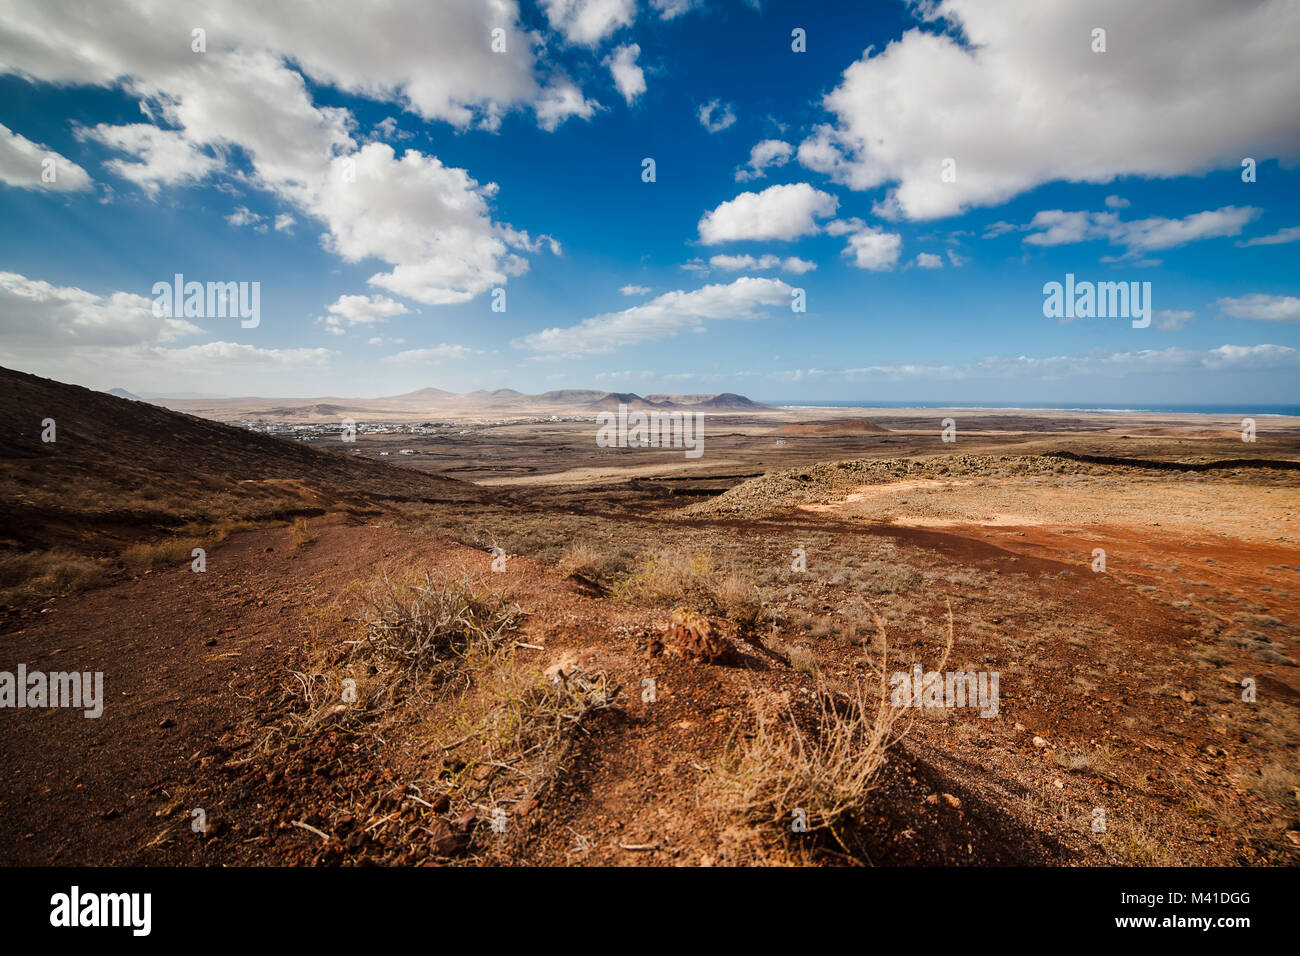 Amazing vulcanic landscape with mountains. Sky is blue with clouds, gravel is red and brown. Fuerteventura Island, Canary Island, Spain, Europe. Stock Photo